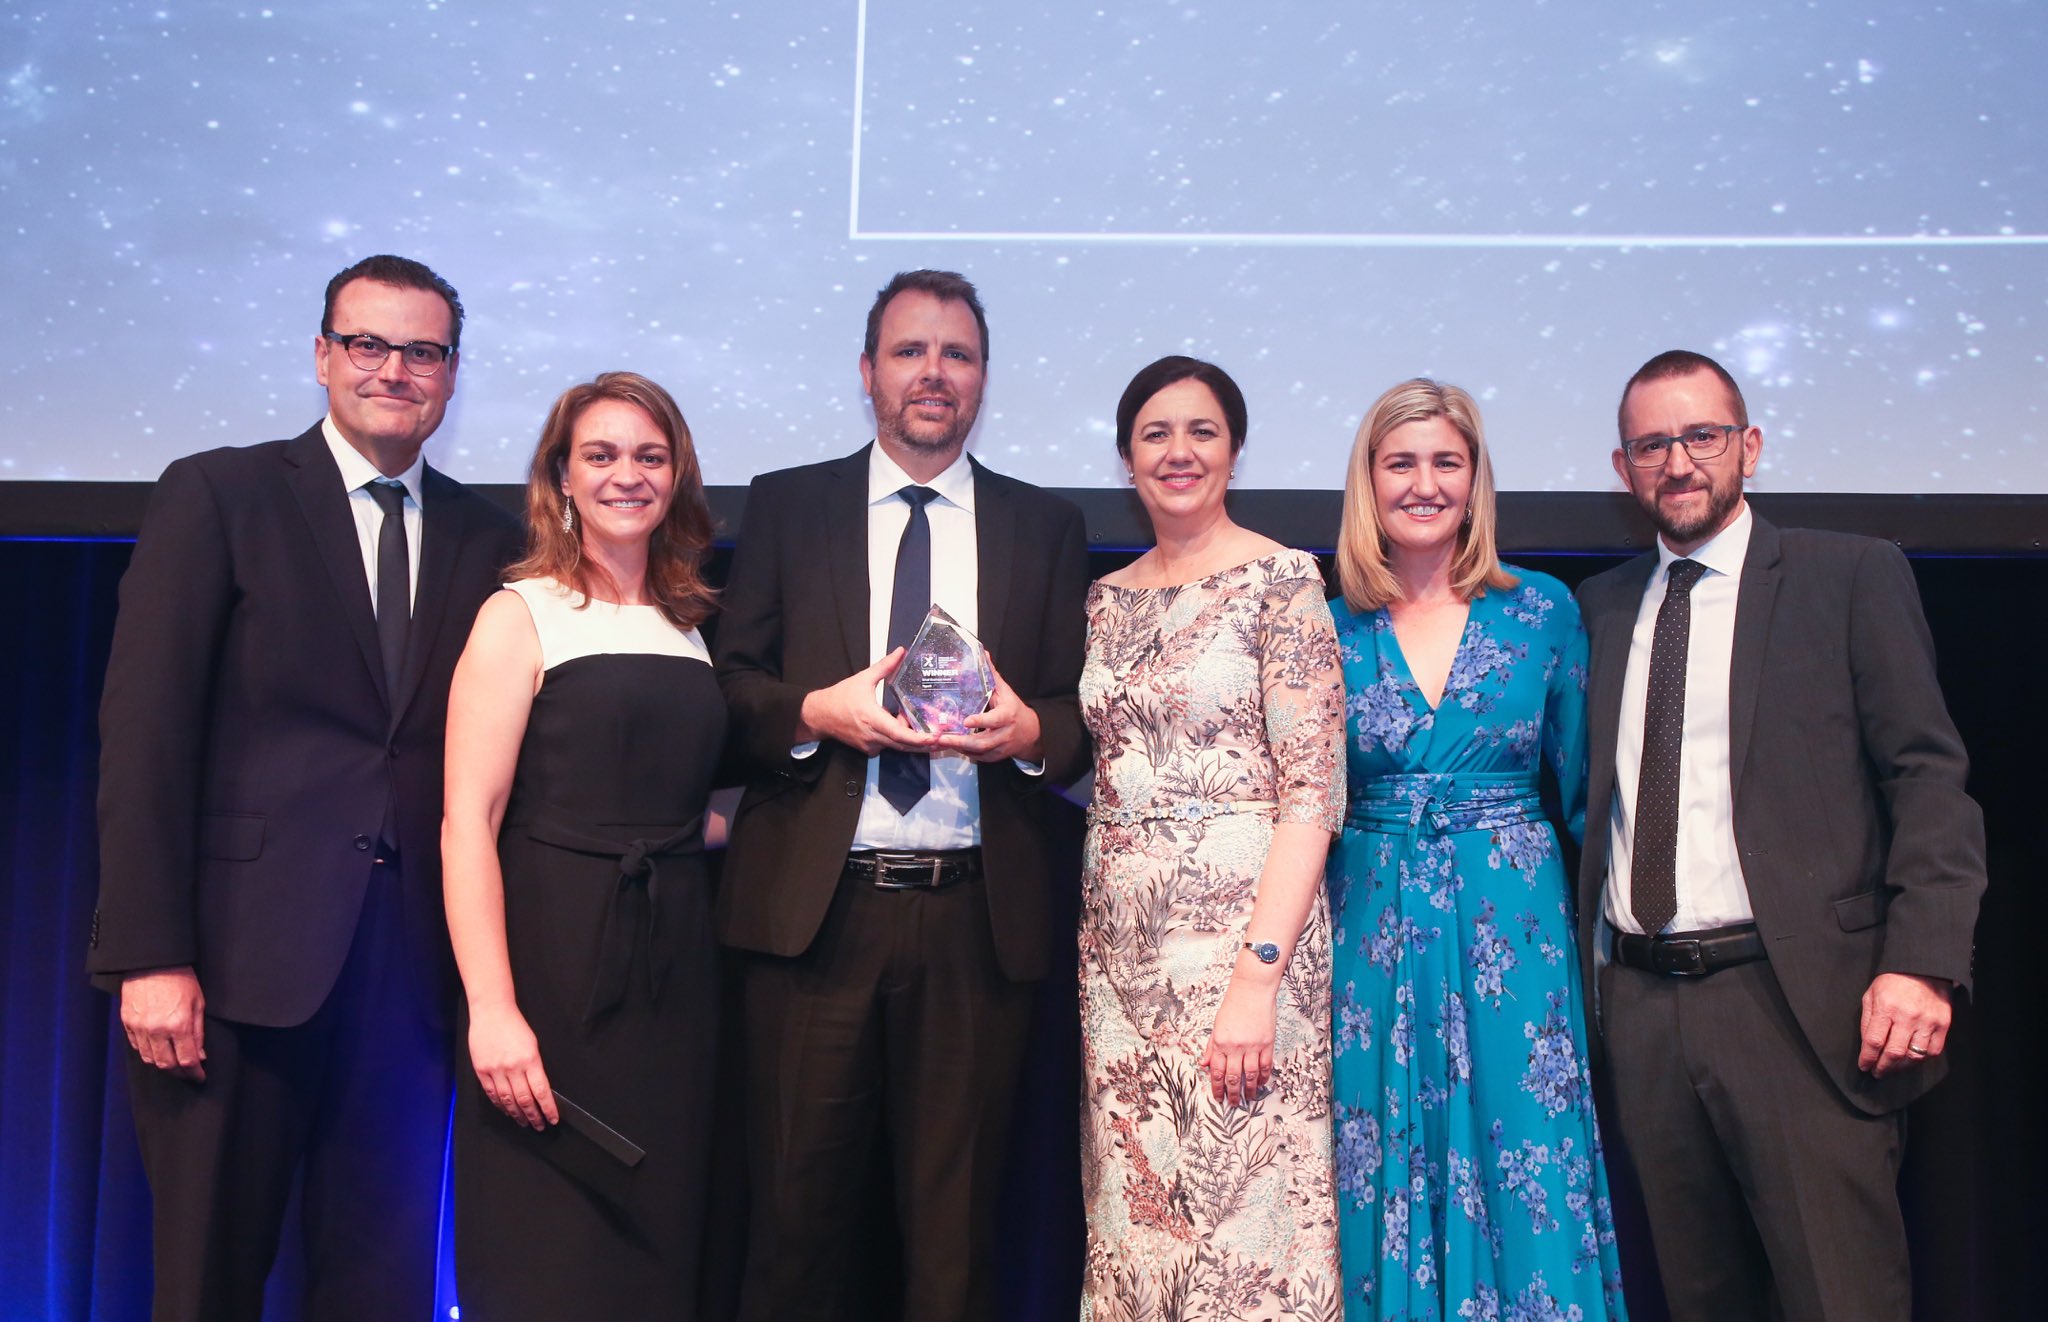 The Typefi team on stage at the 2018 Premier of Queensland's Export Awards with the award sponsor (Peter Neuendorf from CBA) and presenters (Premier of Queensland Annastacia Palaszczuk, and Queensland Minister for Employment and Small Business Shannon Fentiman).